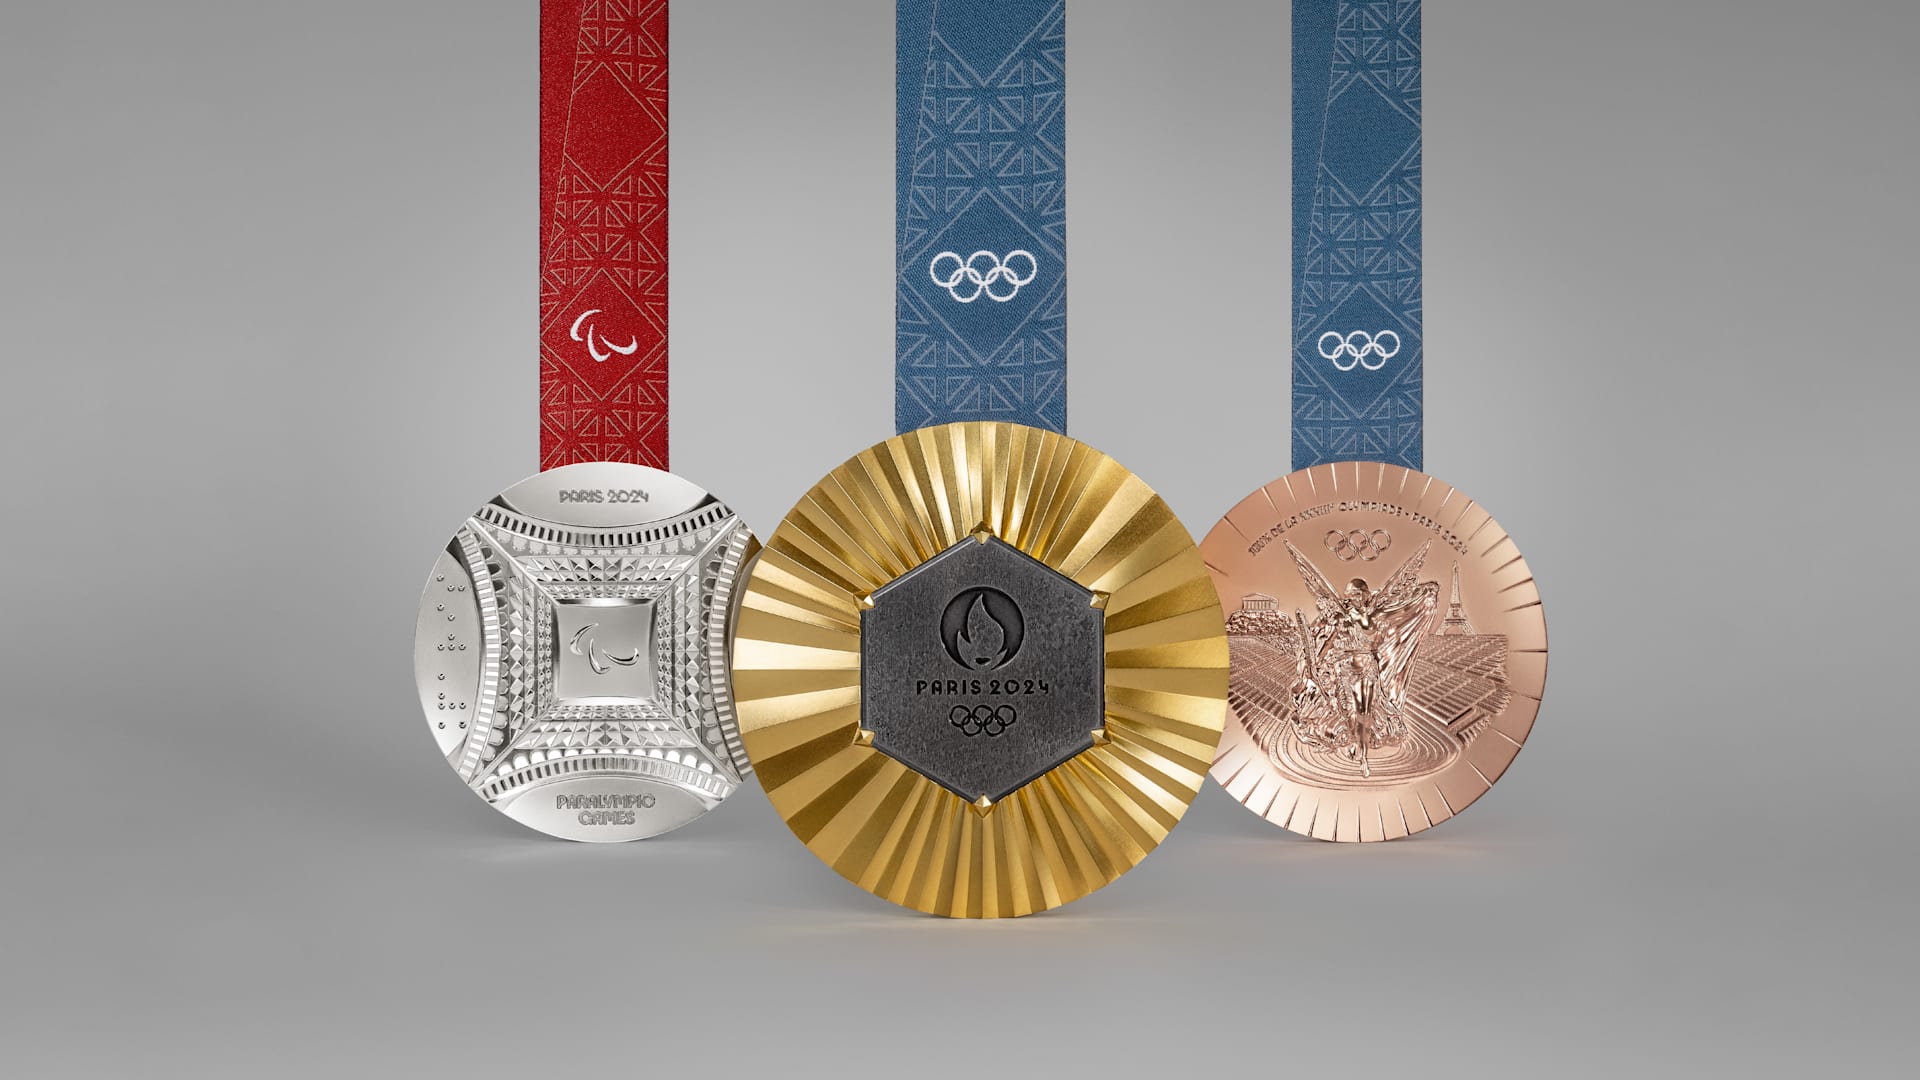 Paris The Olympic And Paralympic Medals Have Been Revealed